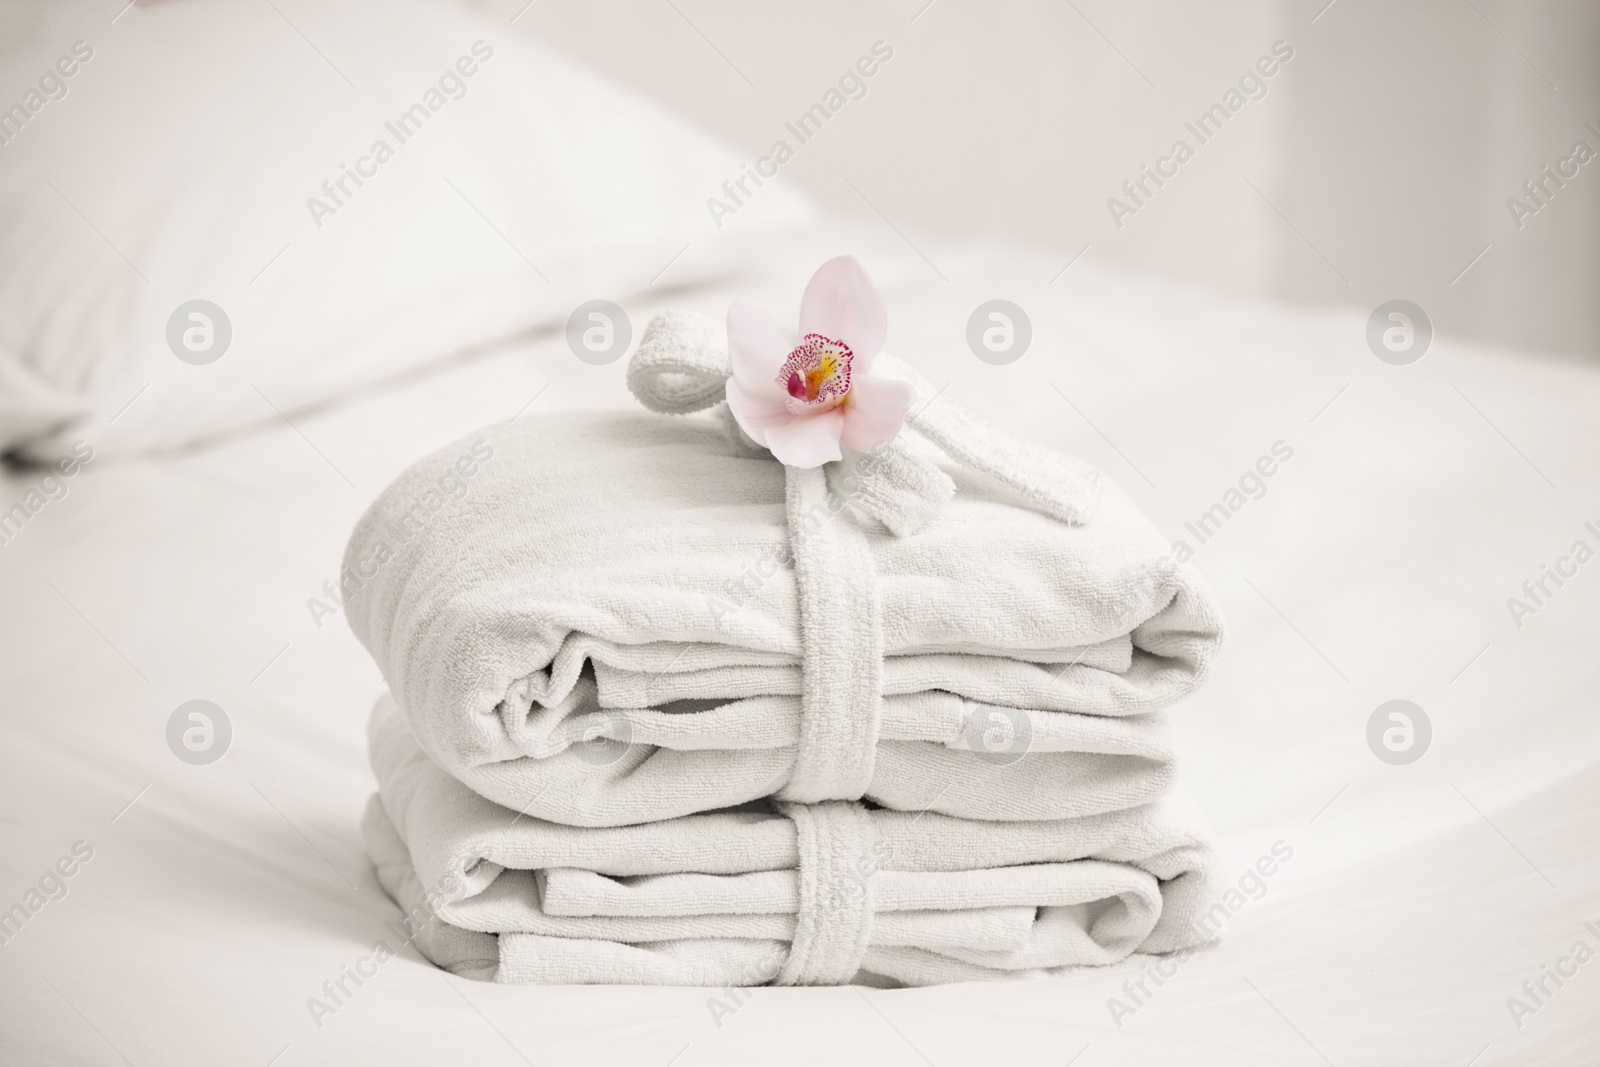 Photo of Clean folded bathrobes on bed in room